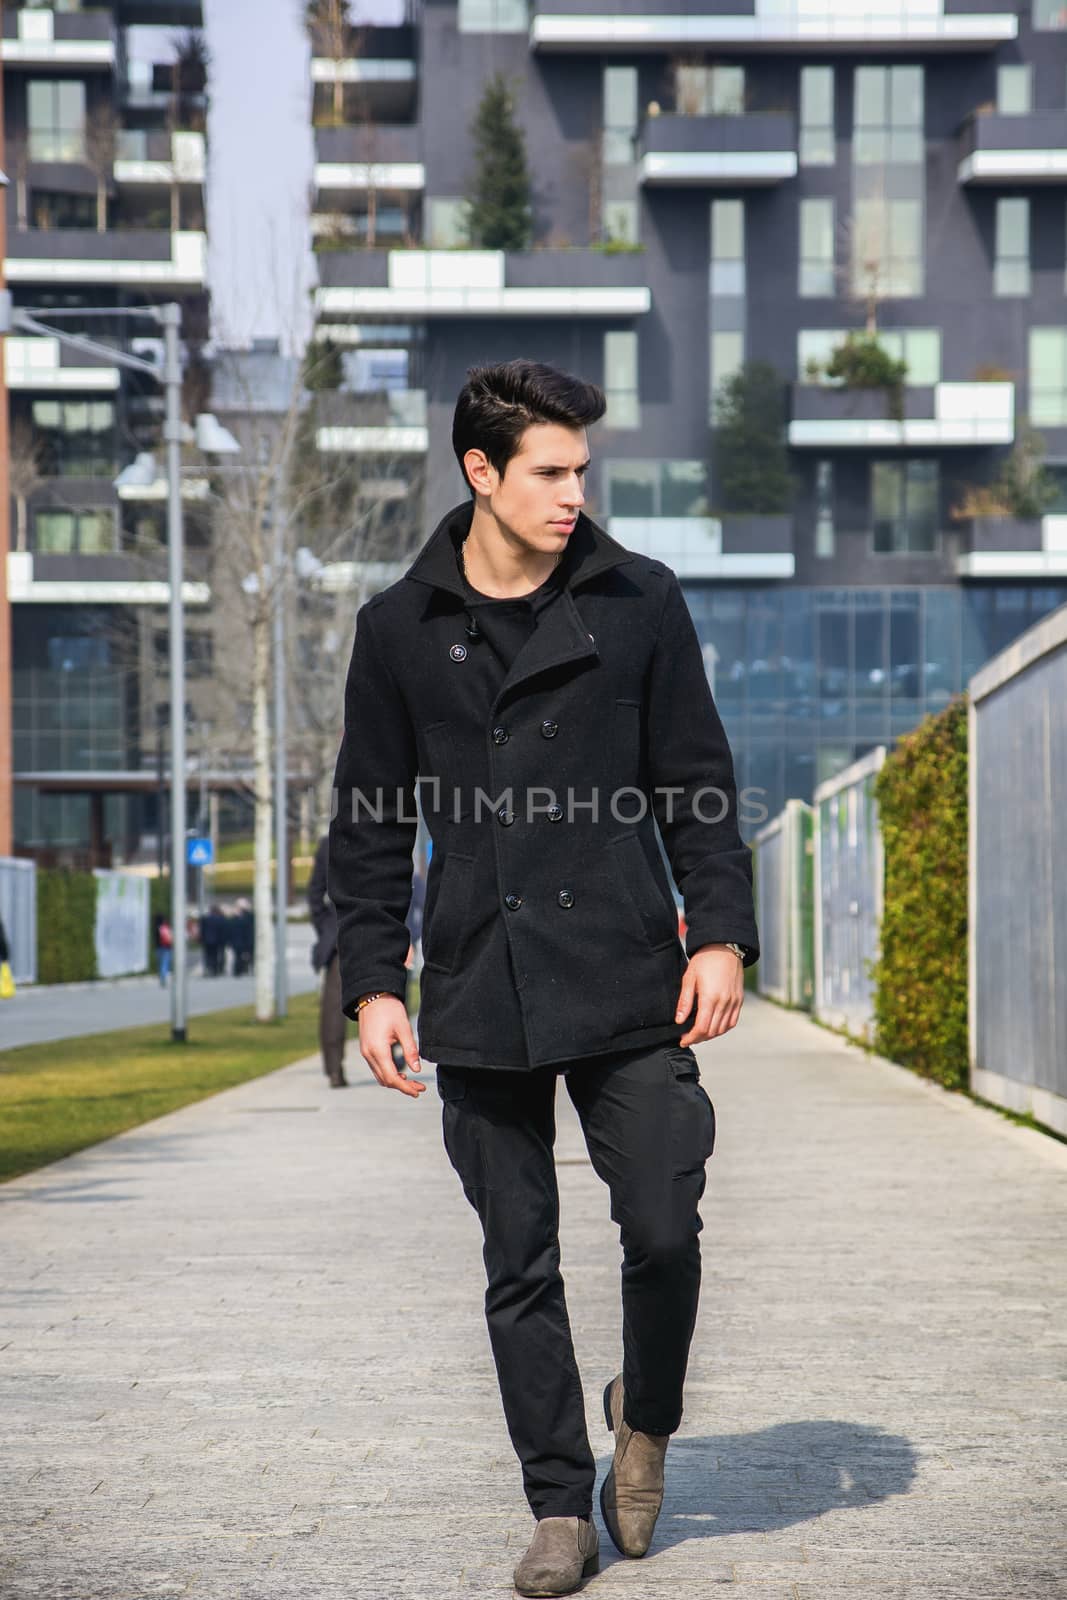 Stylish Young Handsome Man in Black Coat Standing in City Center by artofphoto